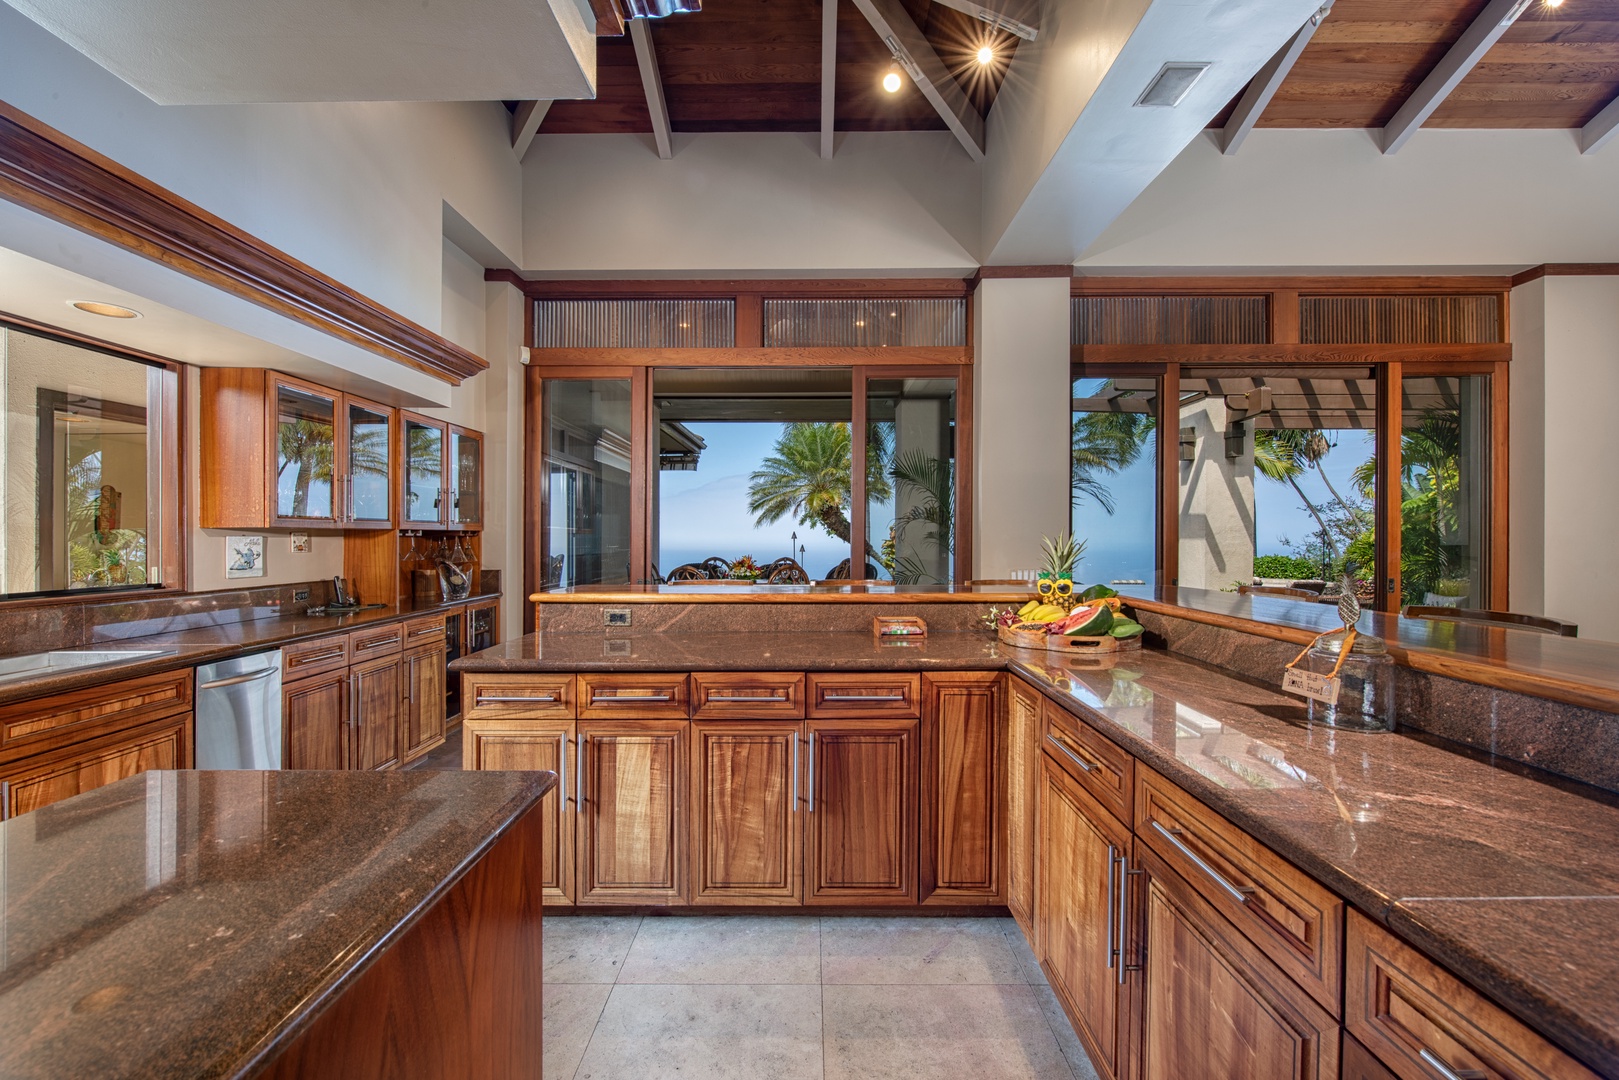 Kailua Kona Vacation Rentals, Hale Wailele** - Expansive counter space and storage for meal preperation